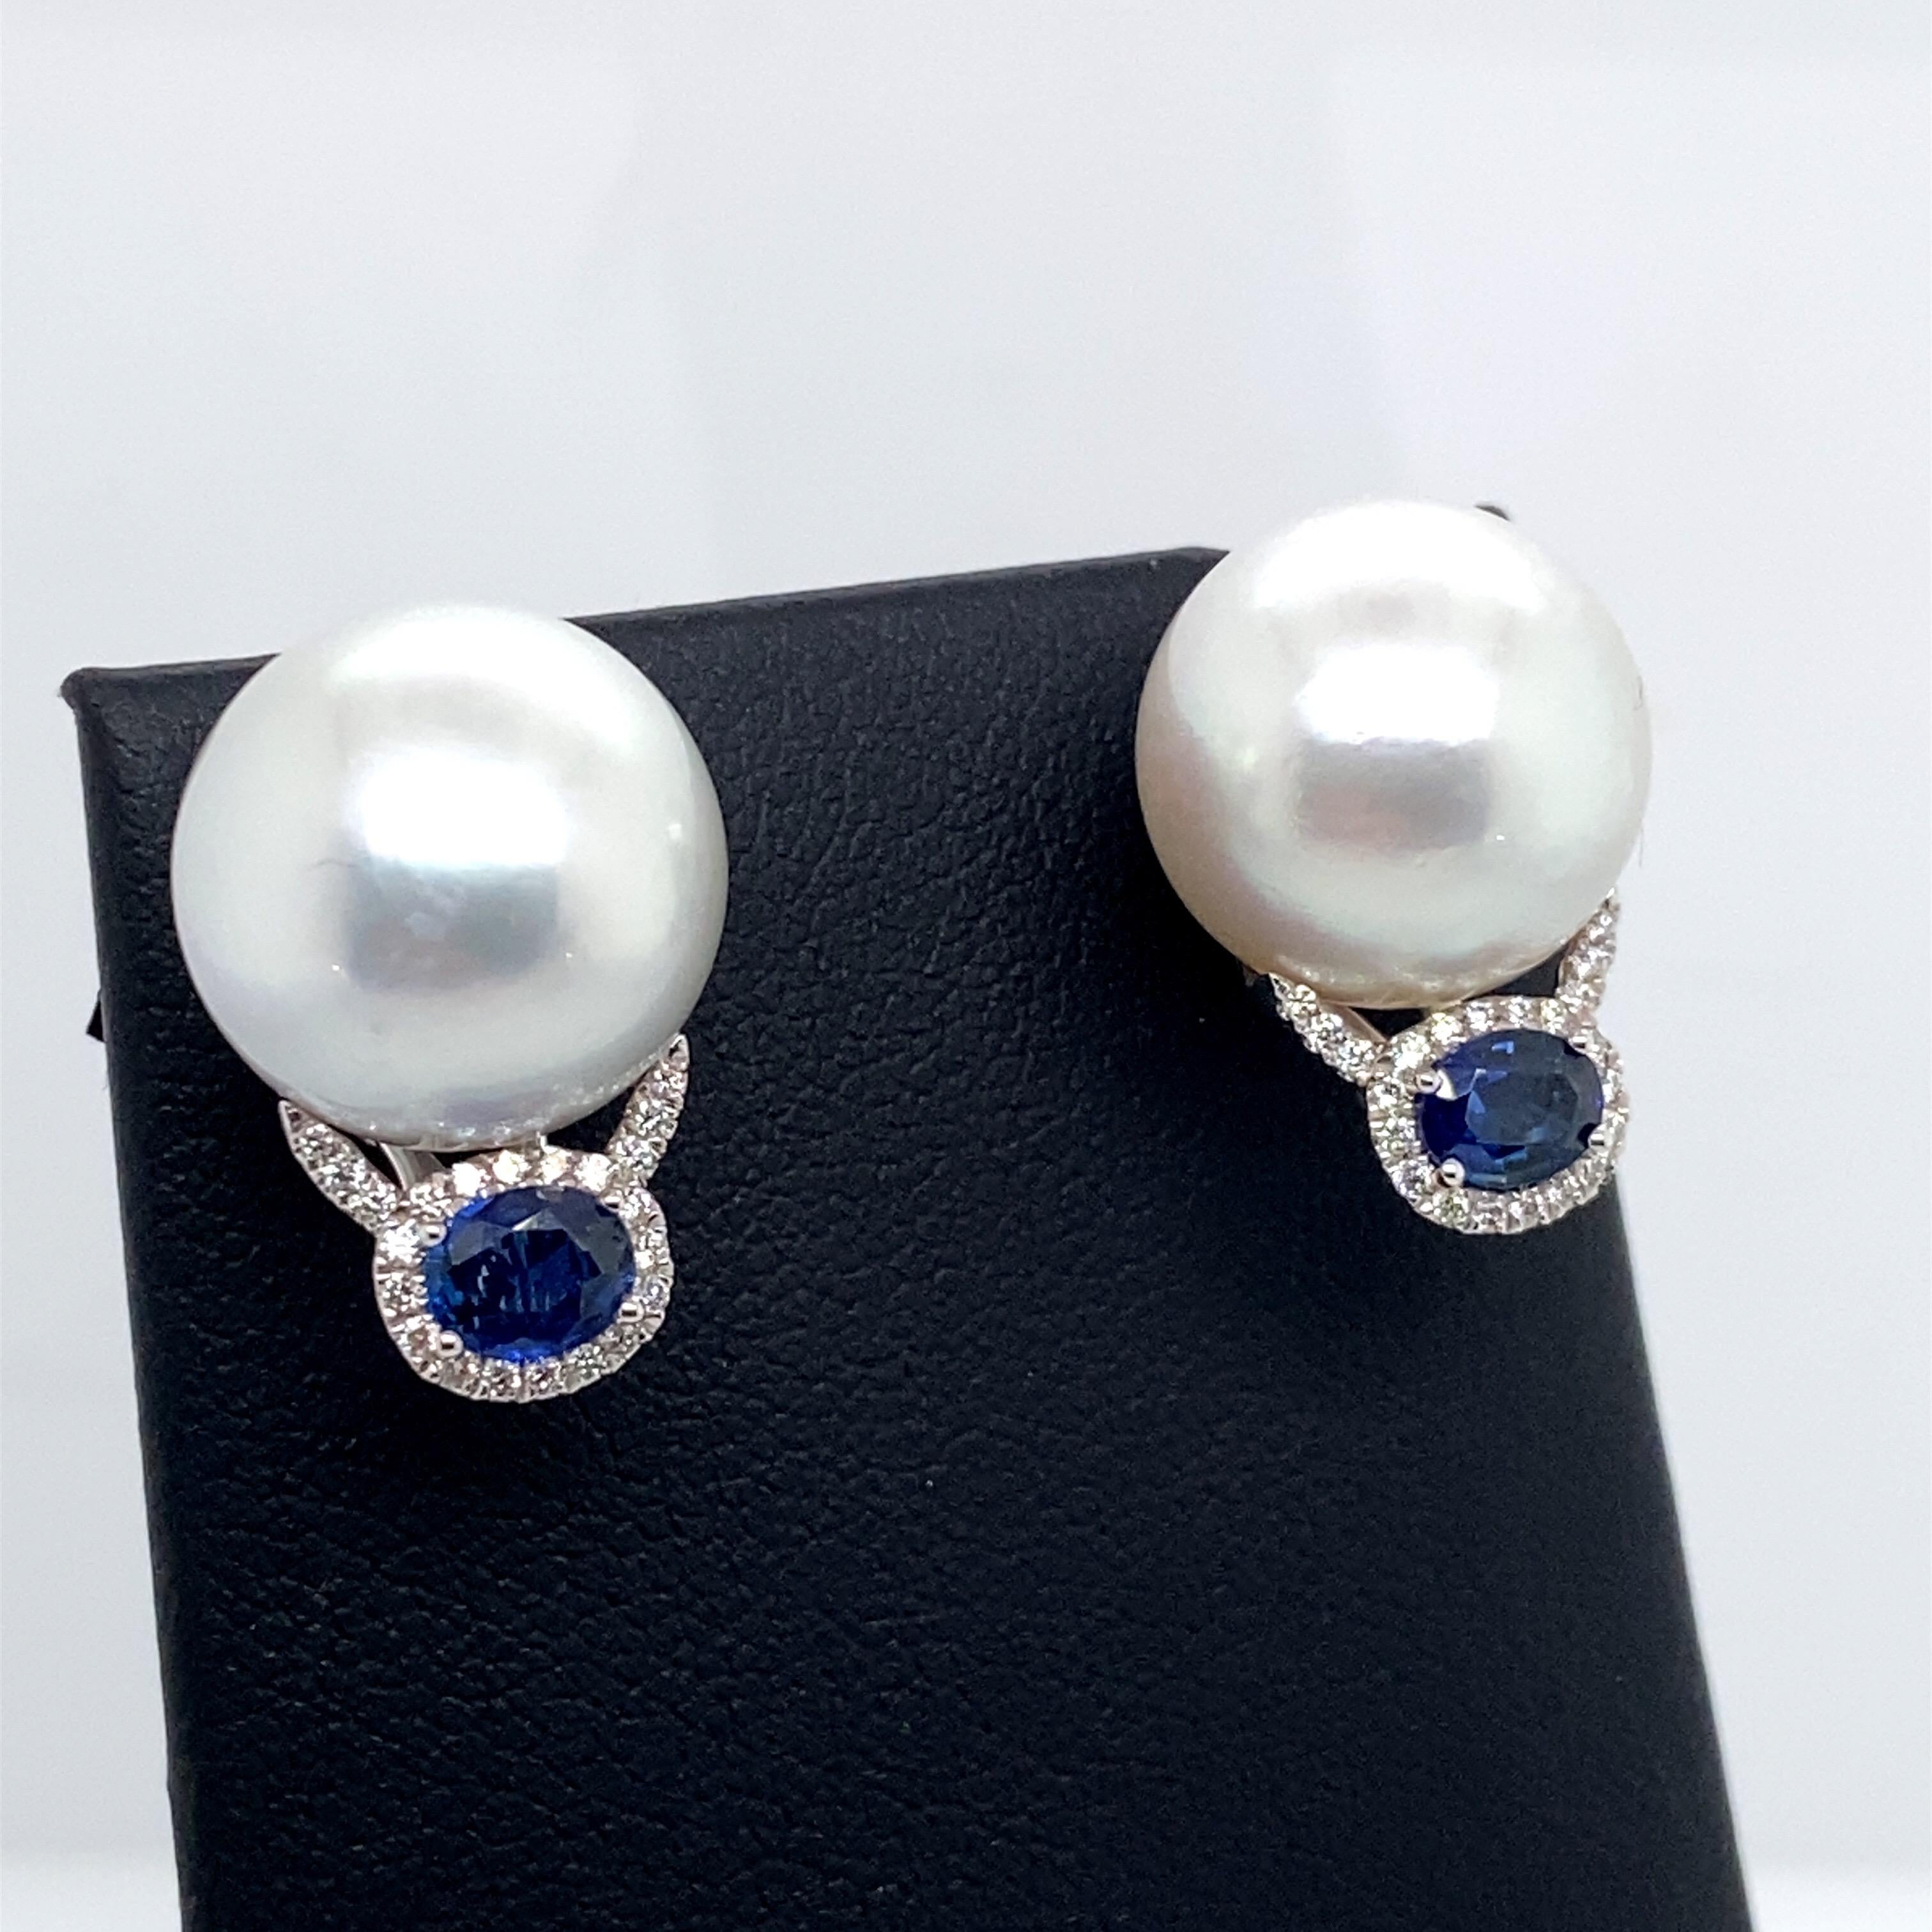 18K White gold drop earrings featuring two South Sea Pearls measuring 13-14 mm with two oval sapphires weighing 0.83 carats surrounded by a diamond halo, 0.16 carats. 
Color G-H
Clarity SI